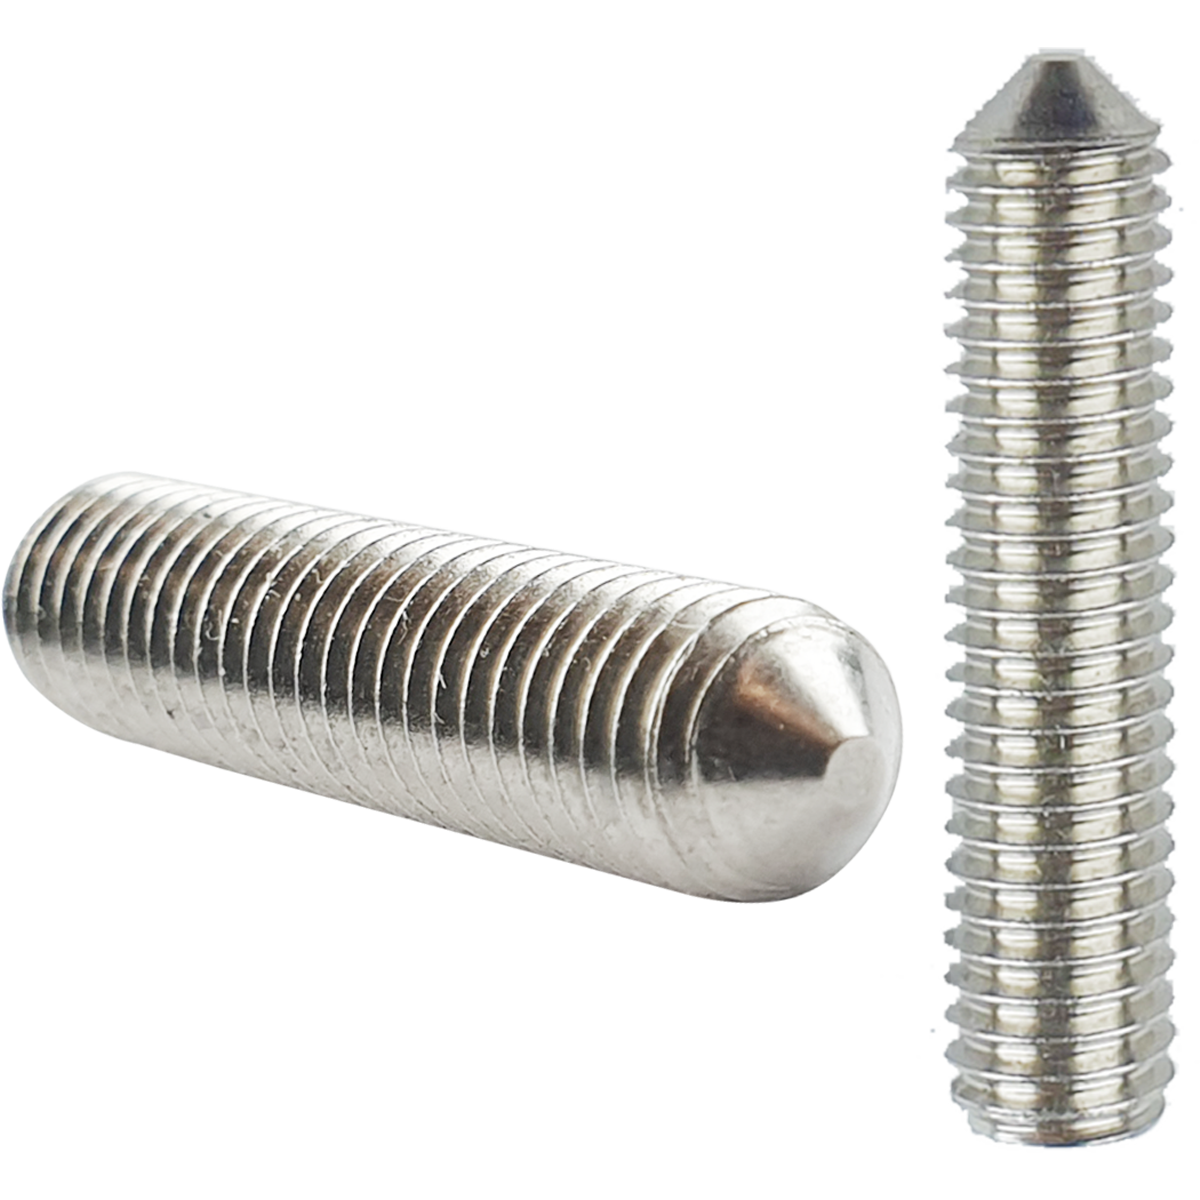 Corrosion-resistant, A2 stainless steel cone point socket set screws known as Grub Screws